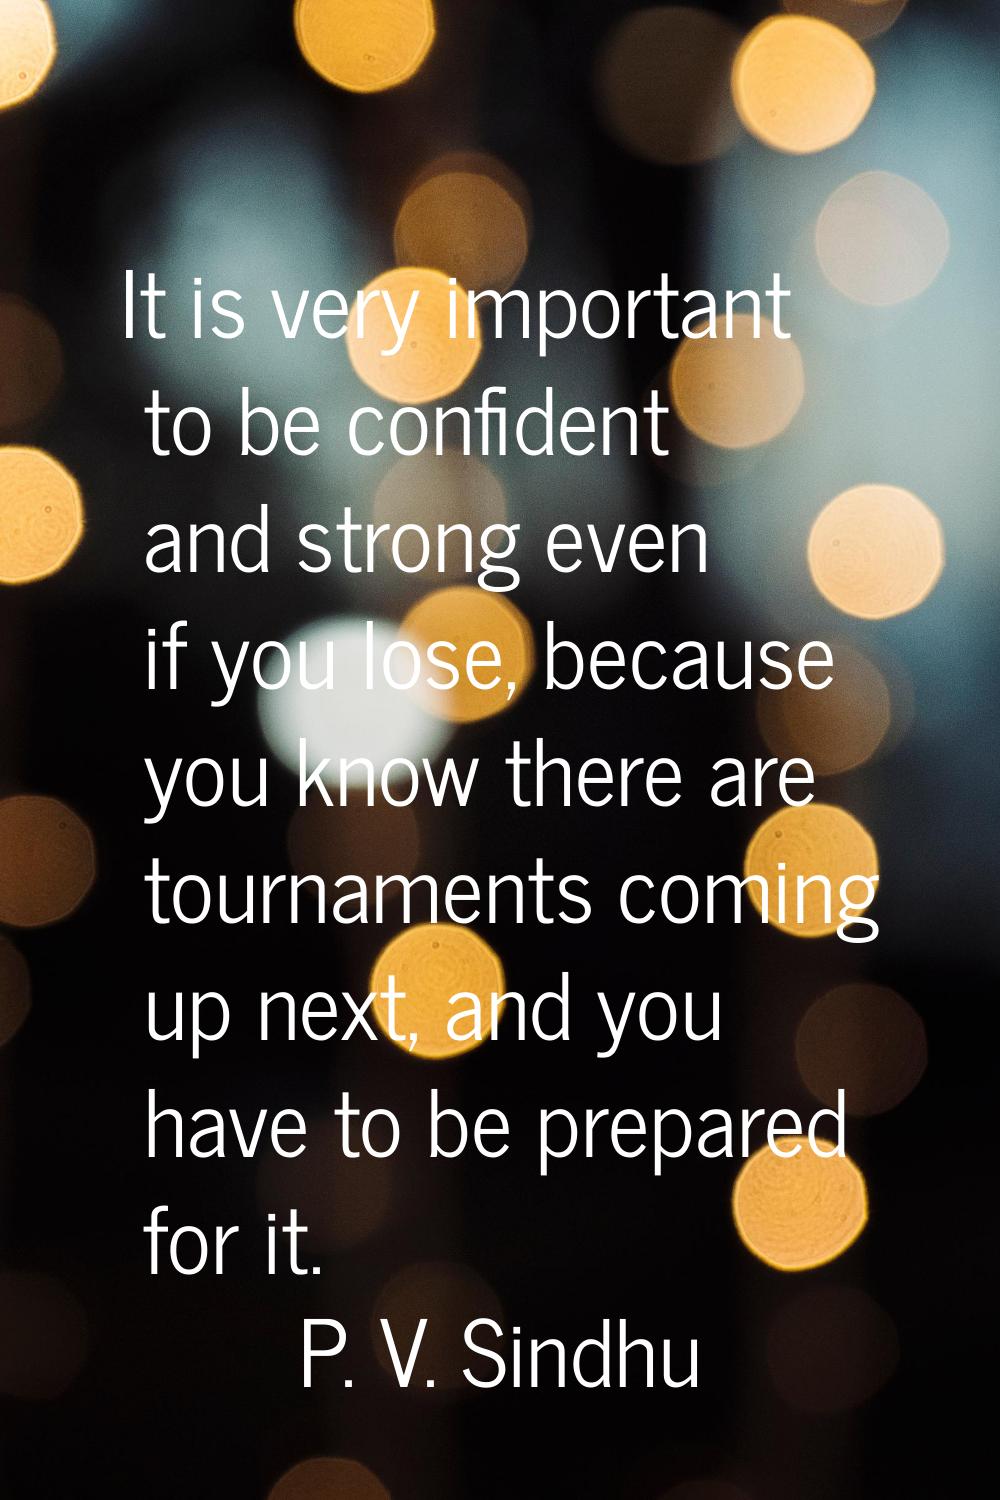 It is very important to be confident and strong even if you lose, because you know there are tourna